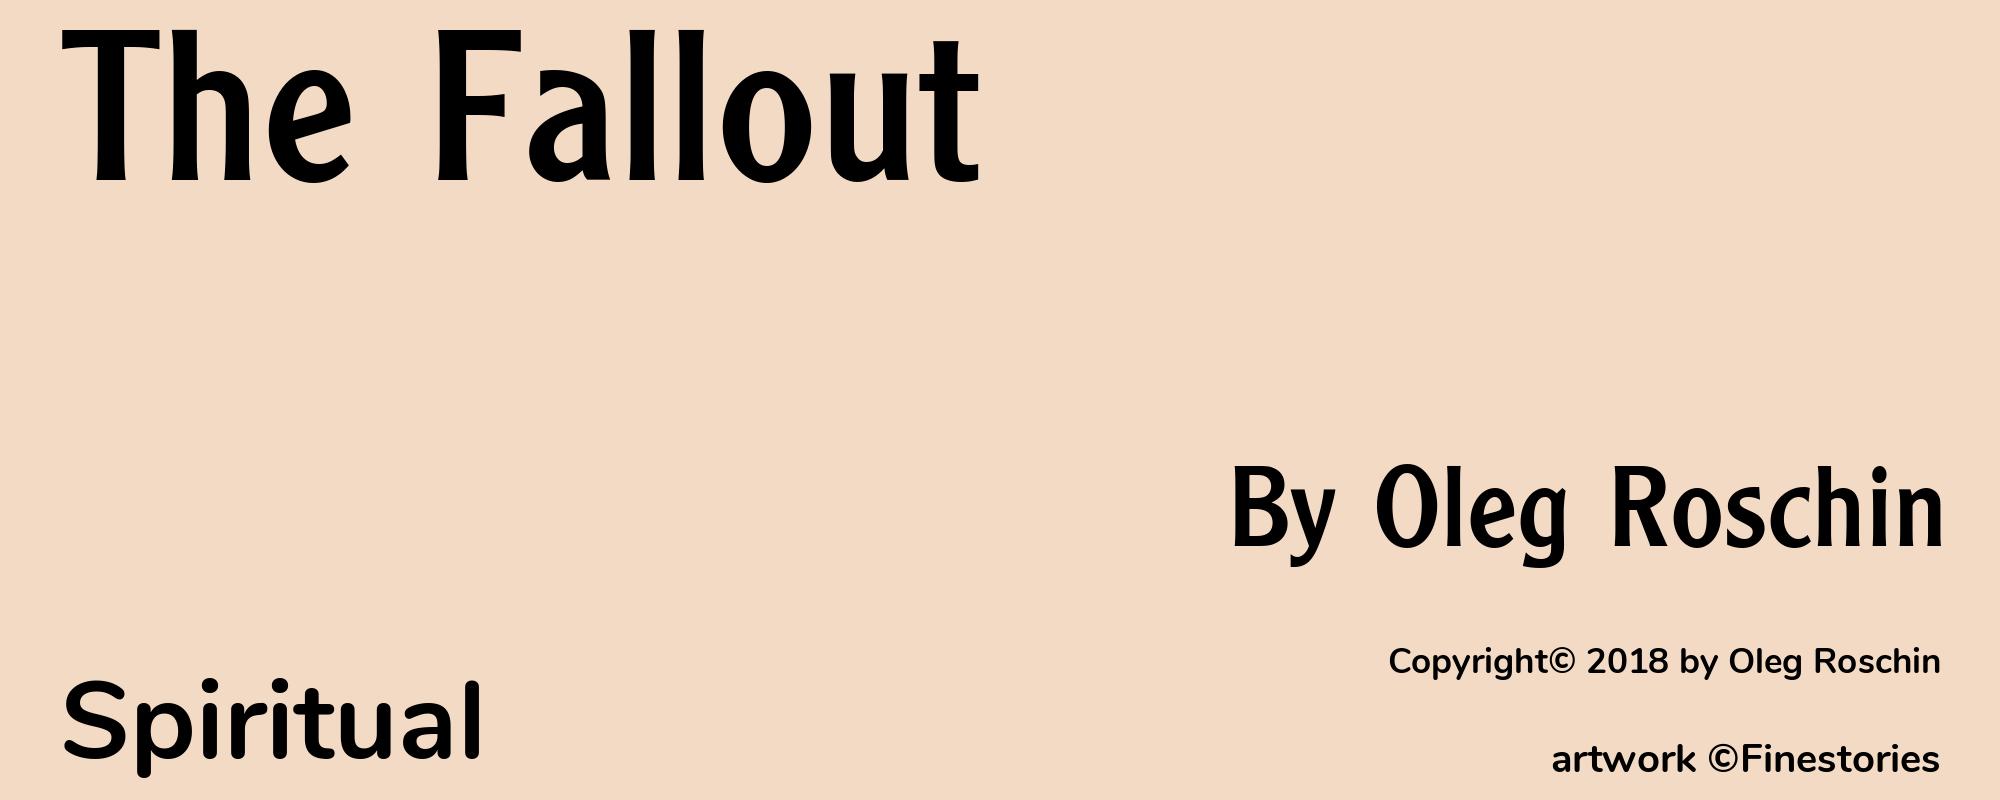 The Fallout - Cover